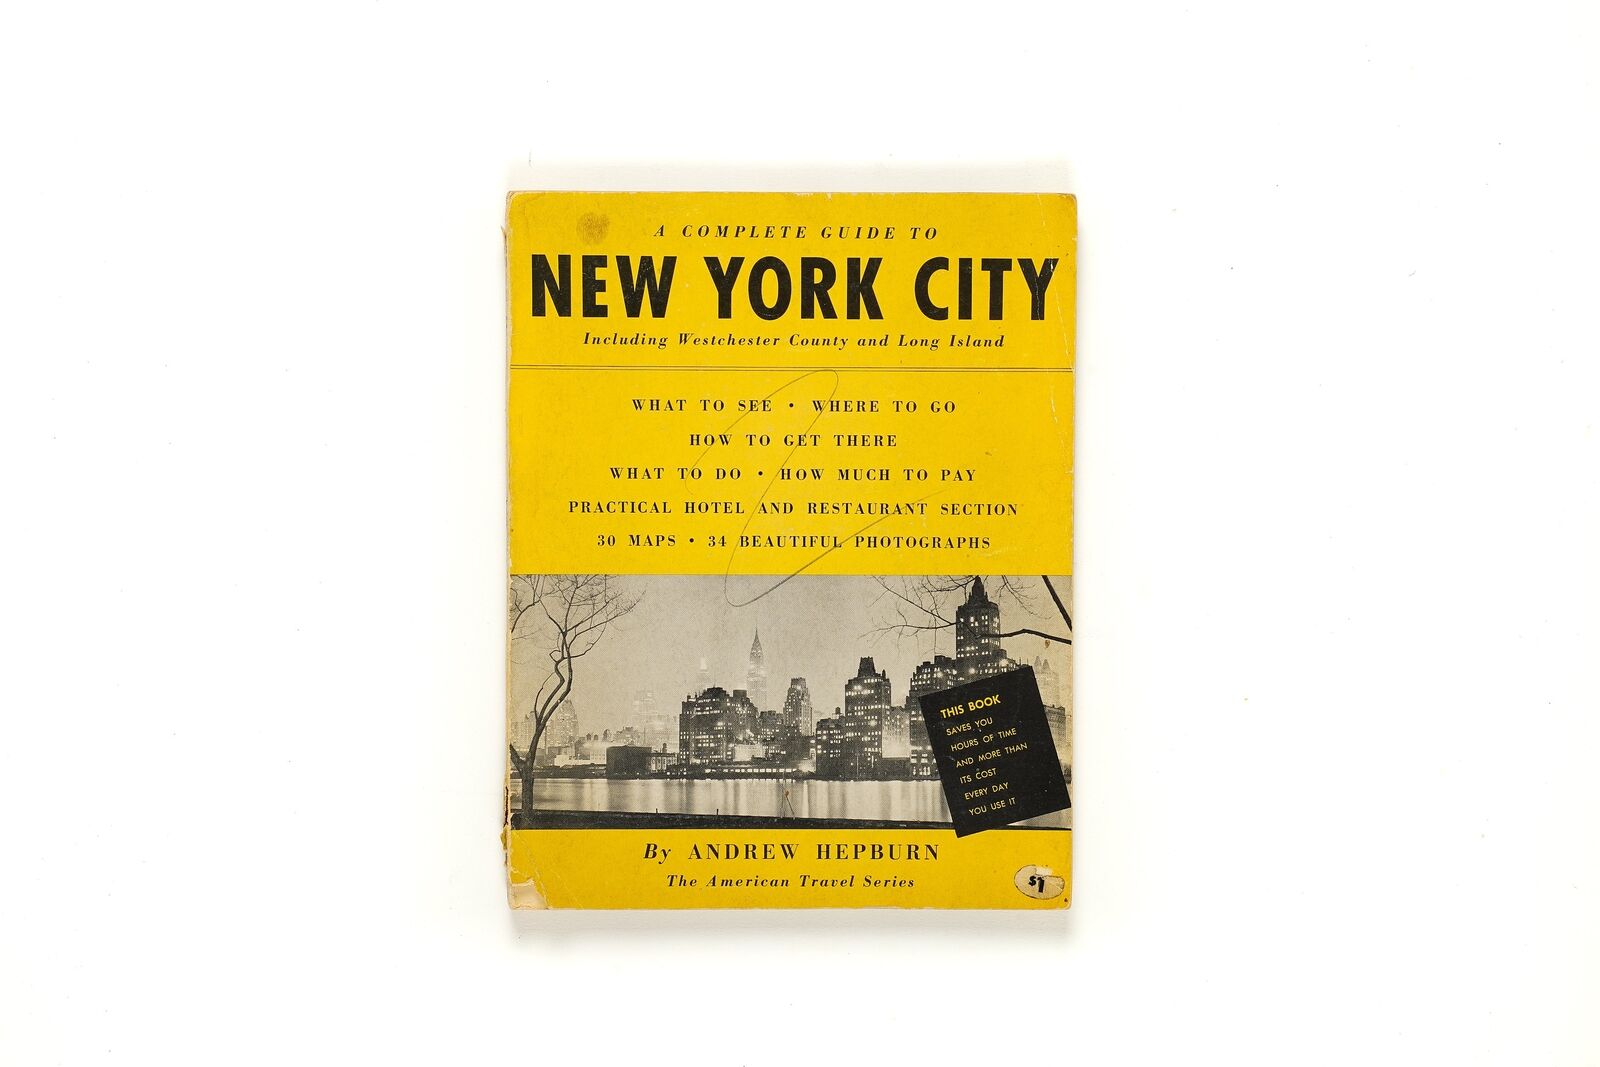 A Complete Guide To New York City by Andrew Hepburn 1952